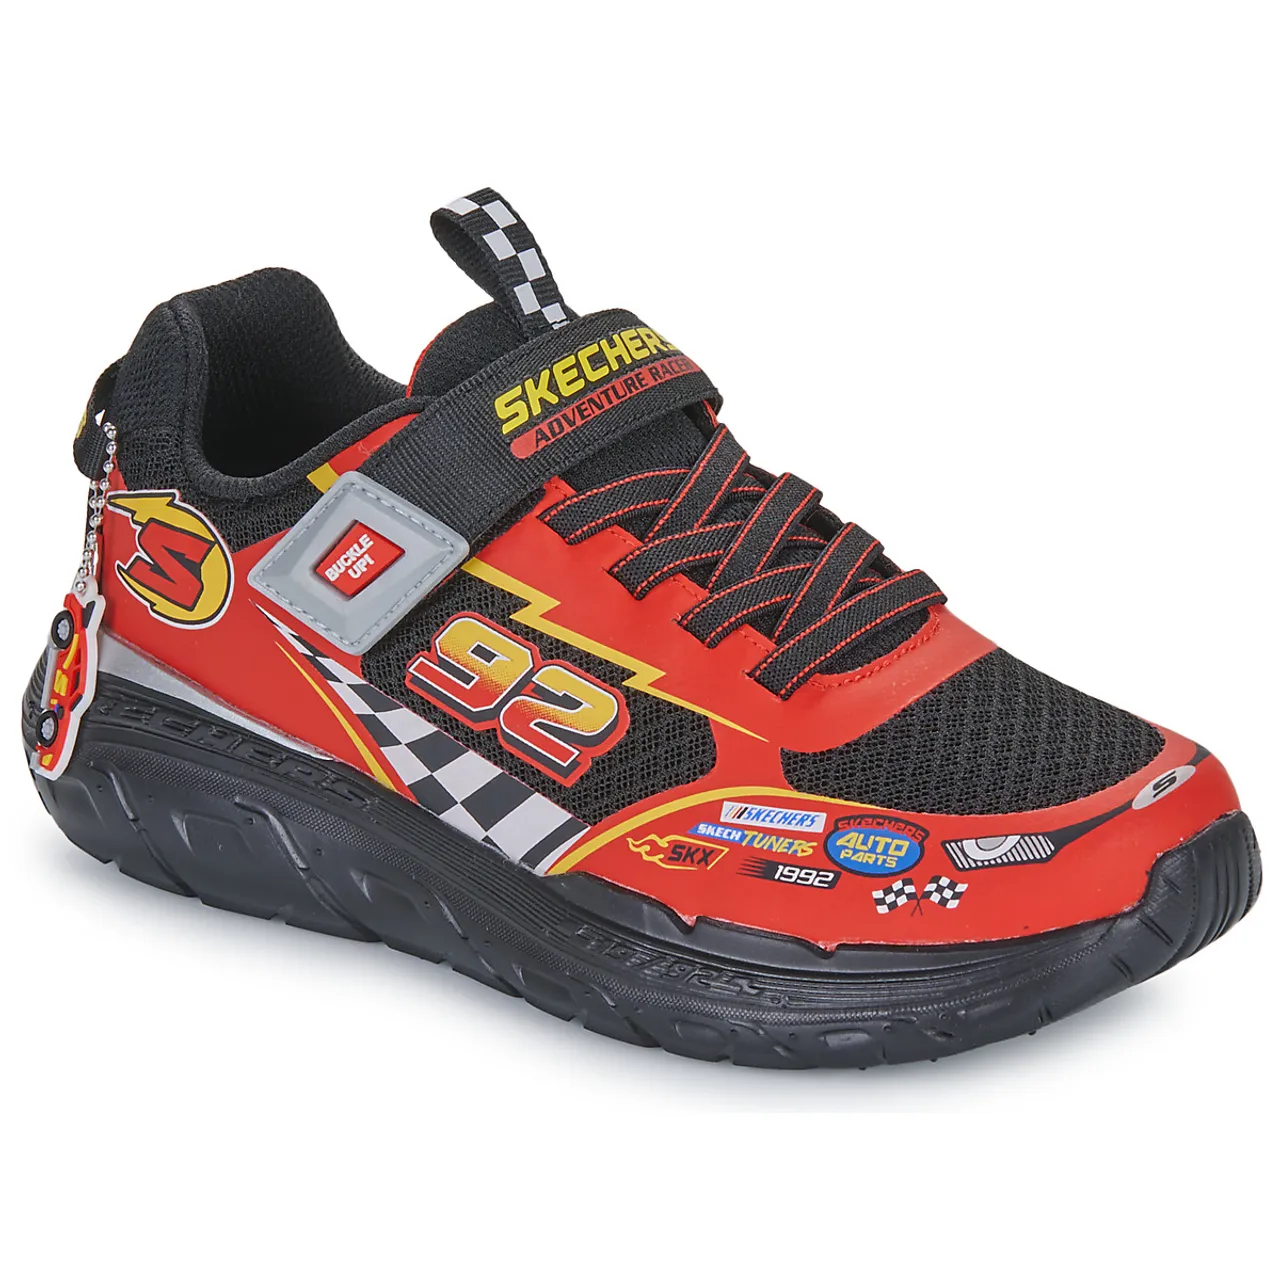 Skechers  SKECH TRACKS - CLASSIC  boys's Children's Shoes (Trainers) in Red